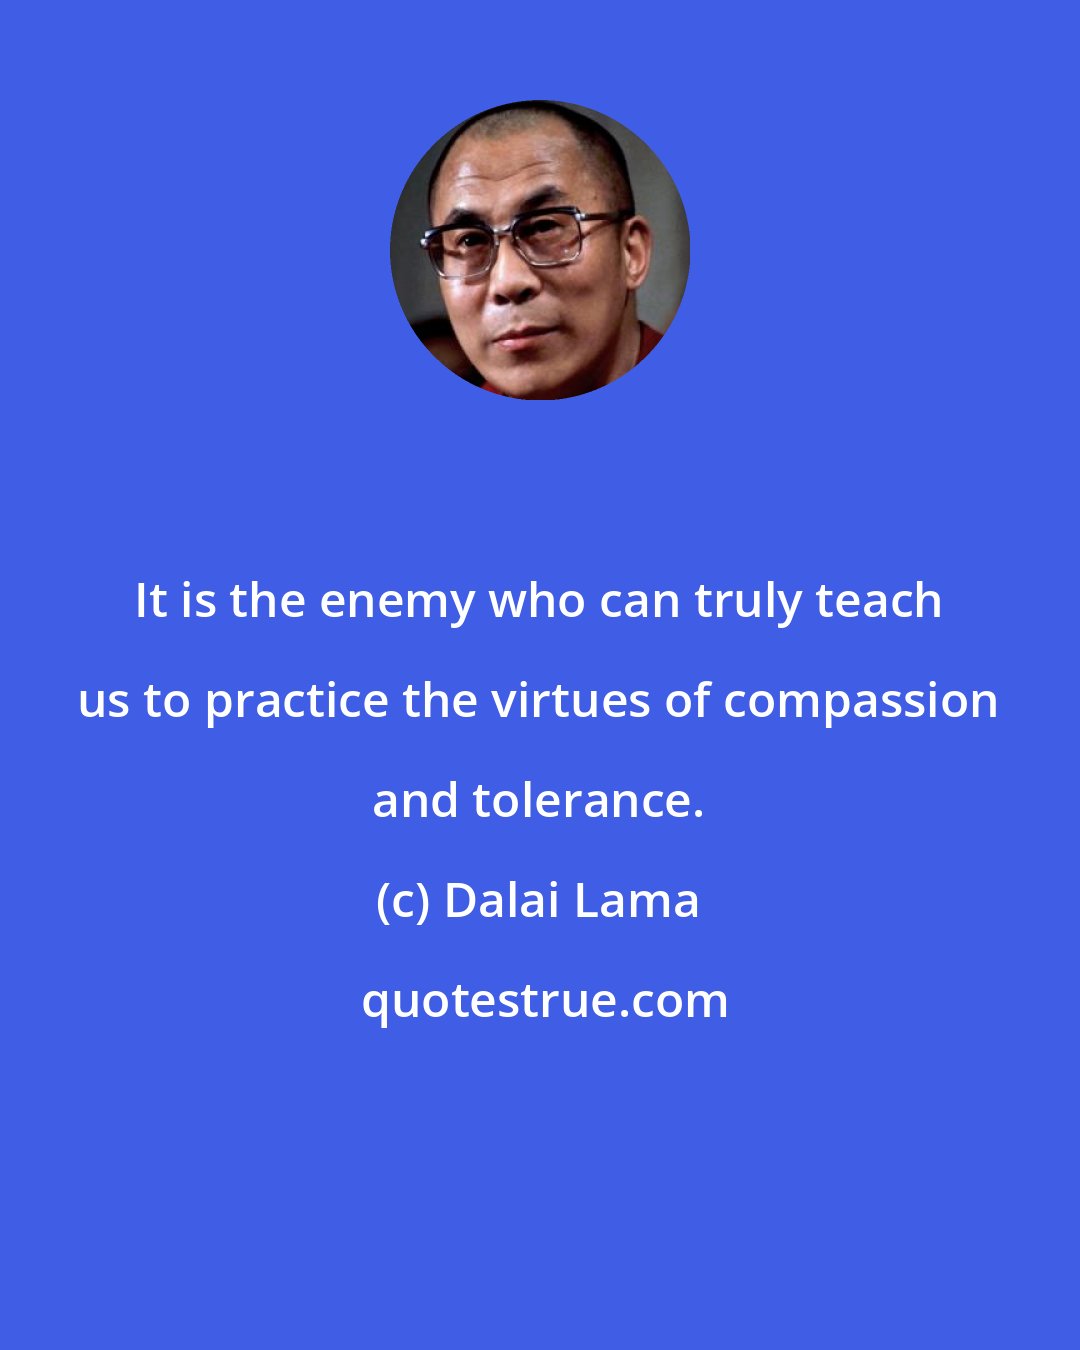 Dalai Lama: It is the enemy who can truly teach us to practice the virtues of compassion and tolerance.